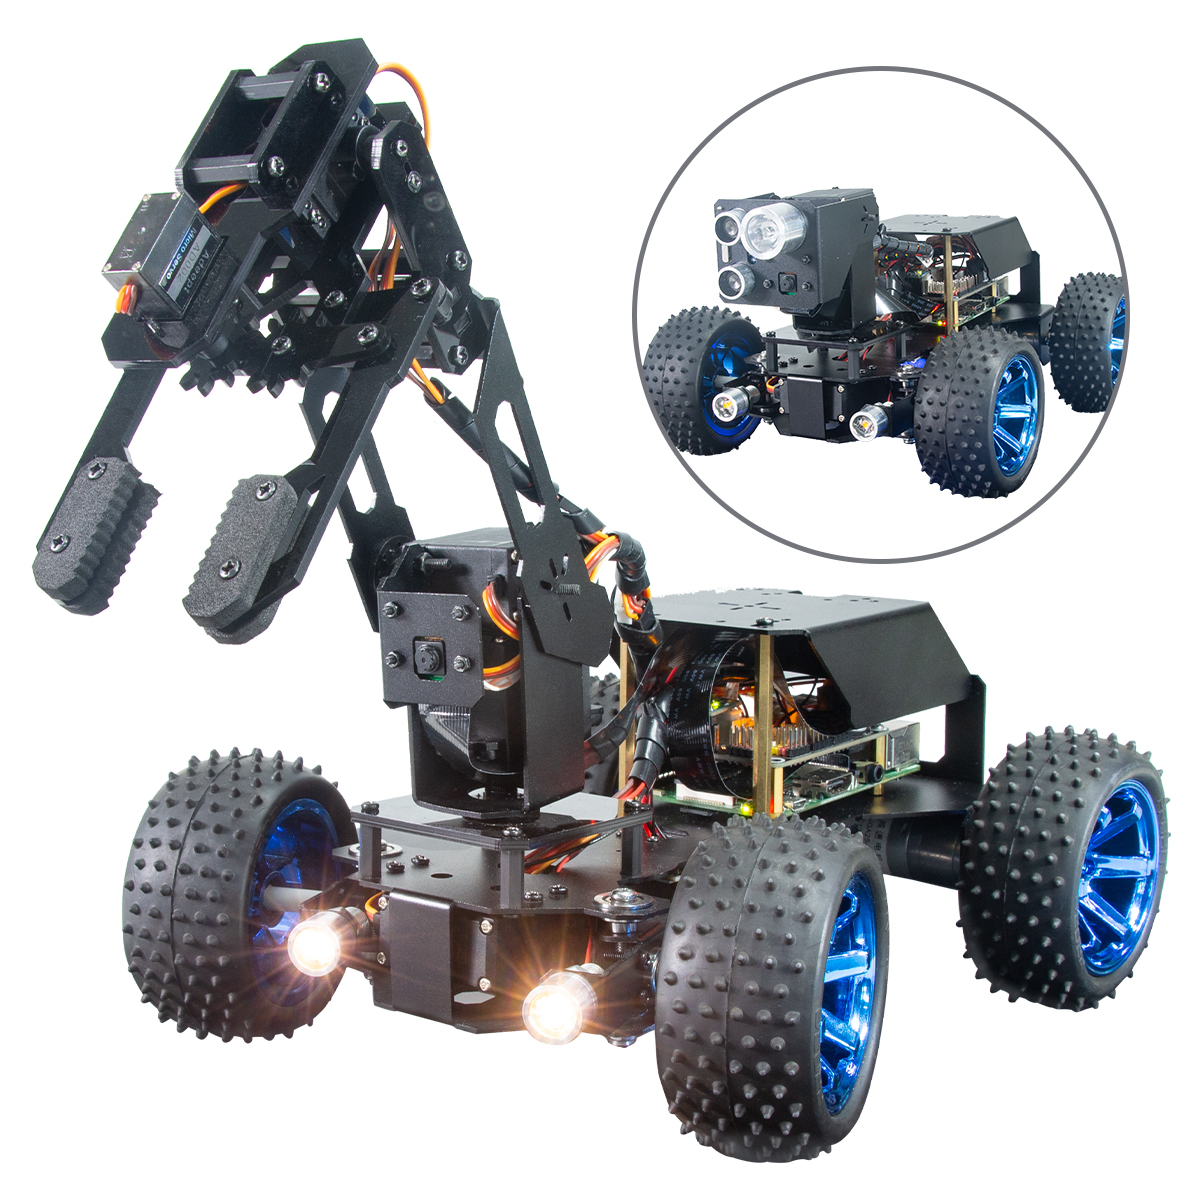 Adeept PiCar Pro Smart Robot Car Kit 2-in-1 4WD Car Robot with 4-DOF Robotic Arm for Raspberry Pi